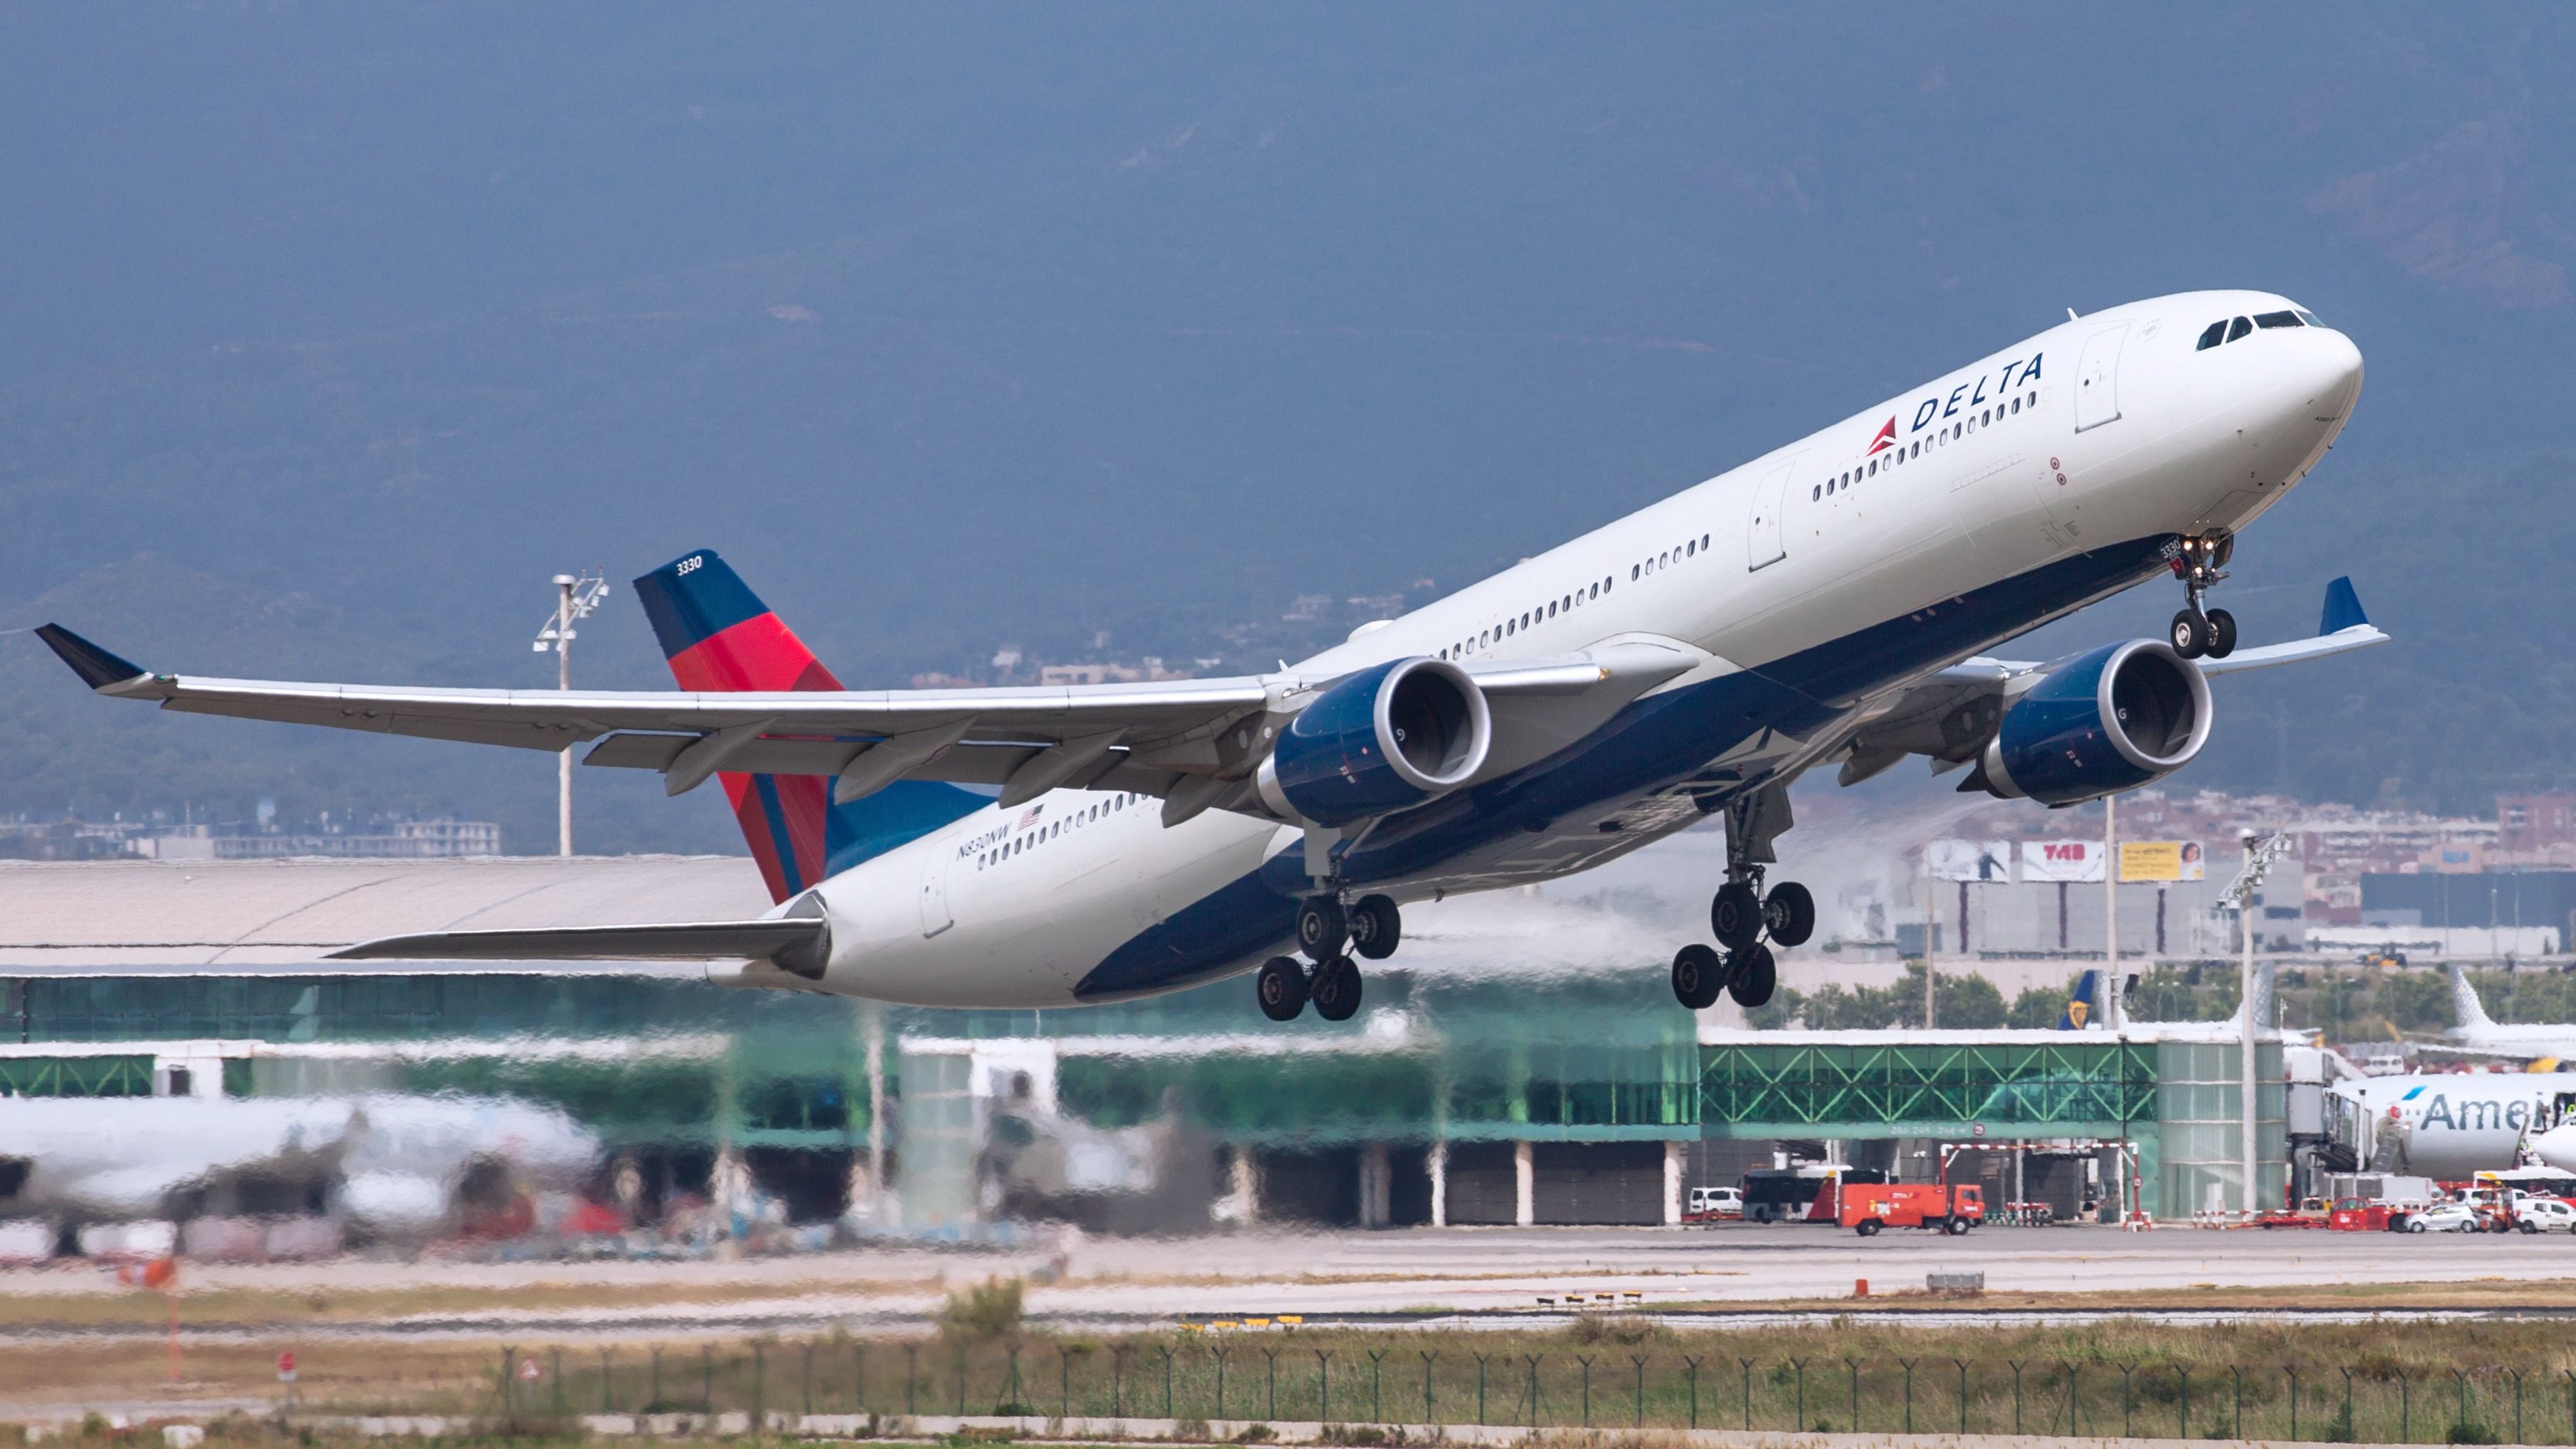 Maggots Onboard: Delta Air Lines Airbus A330-300 Returns To